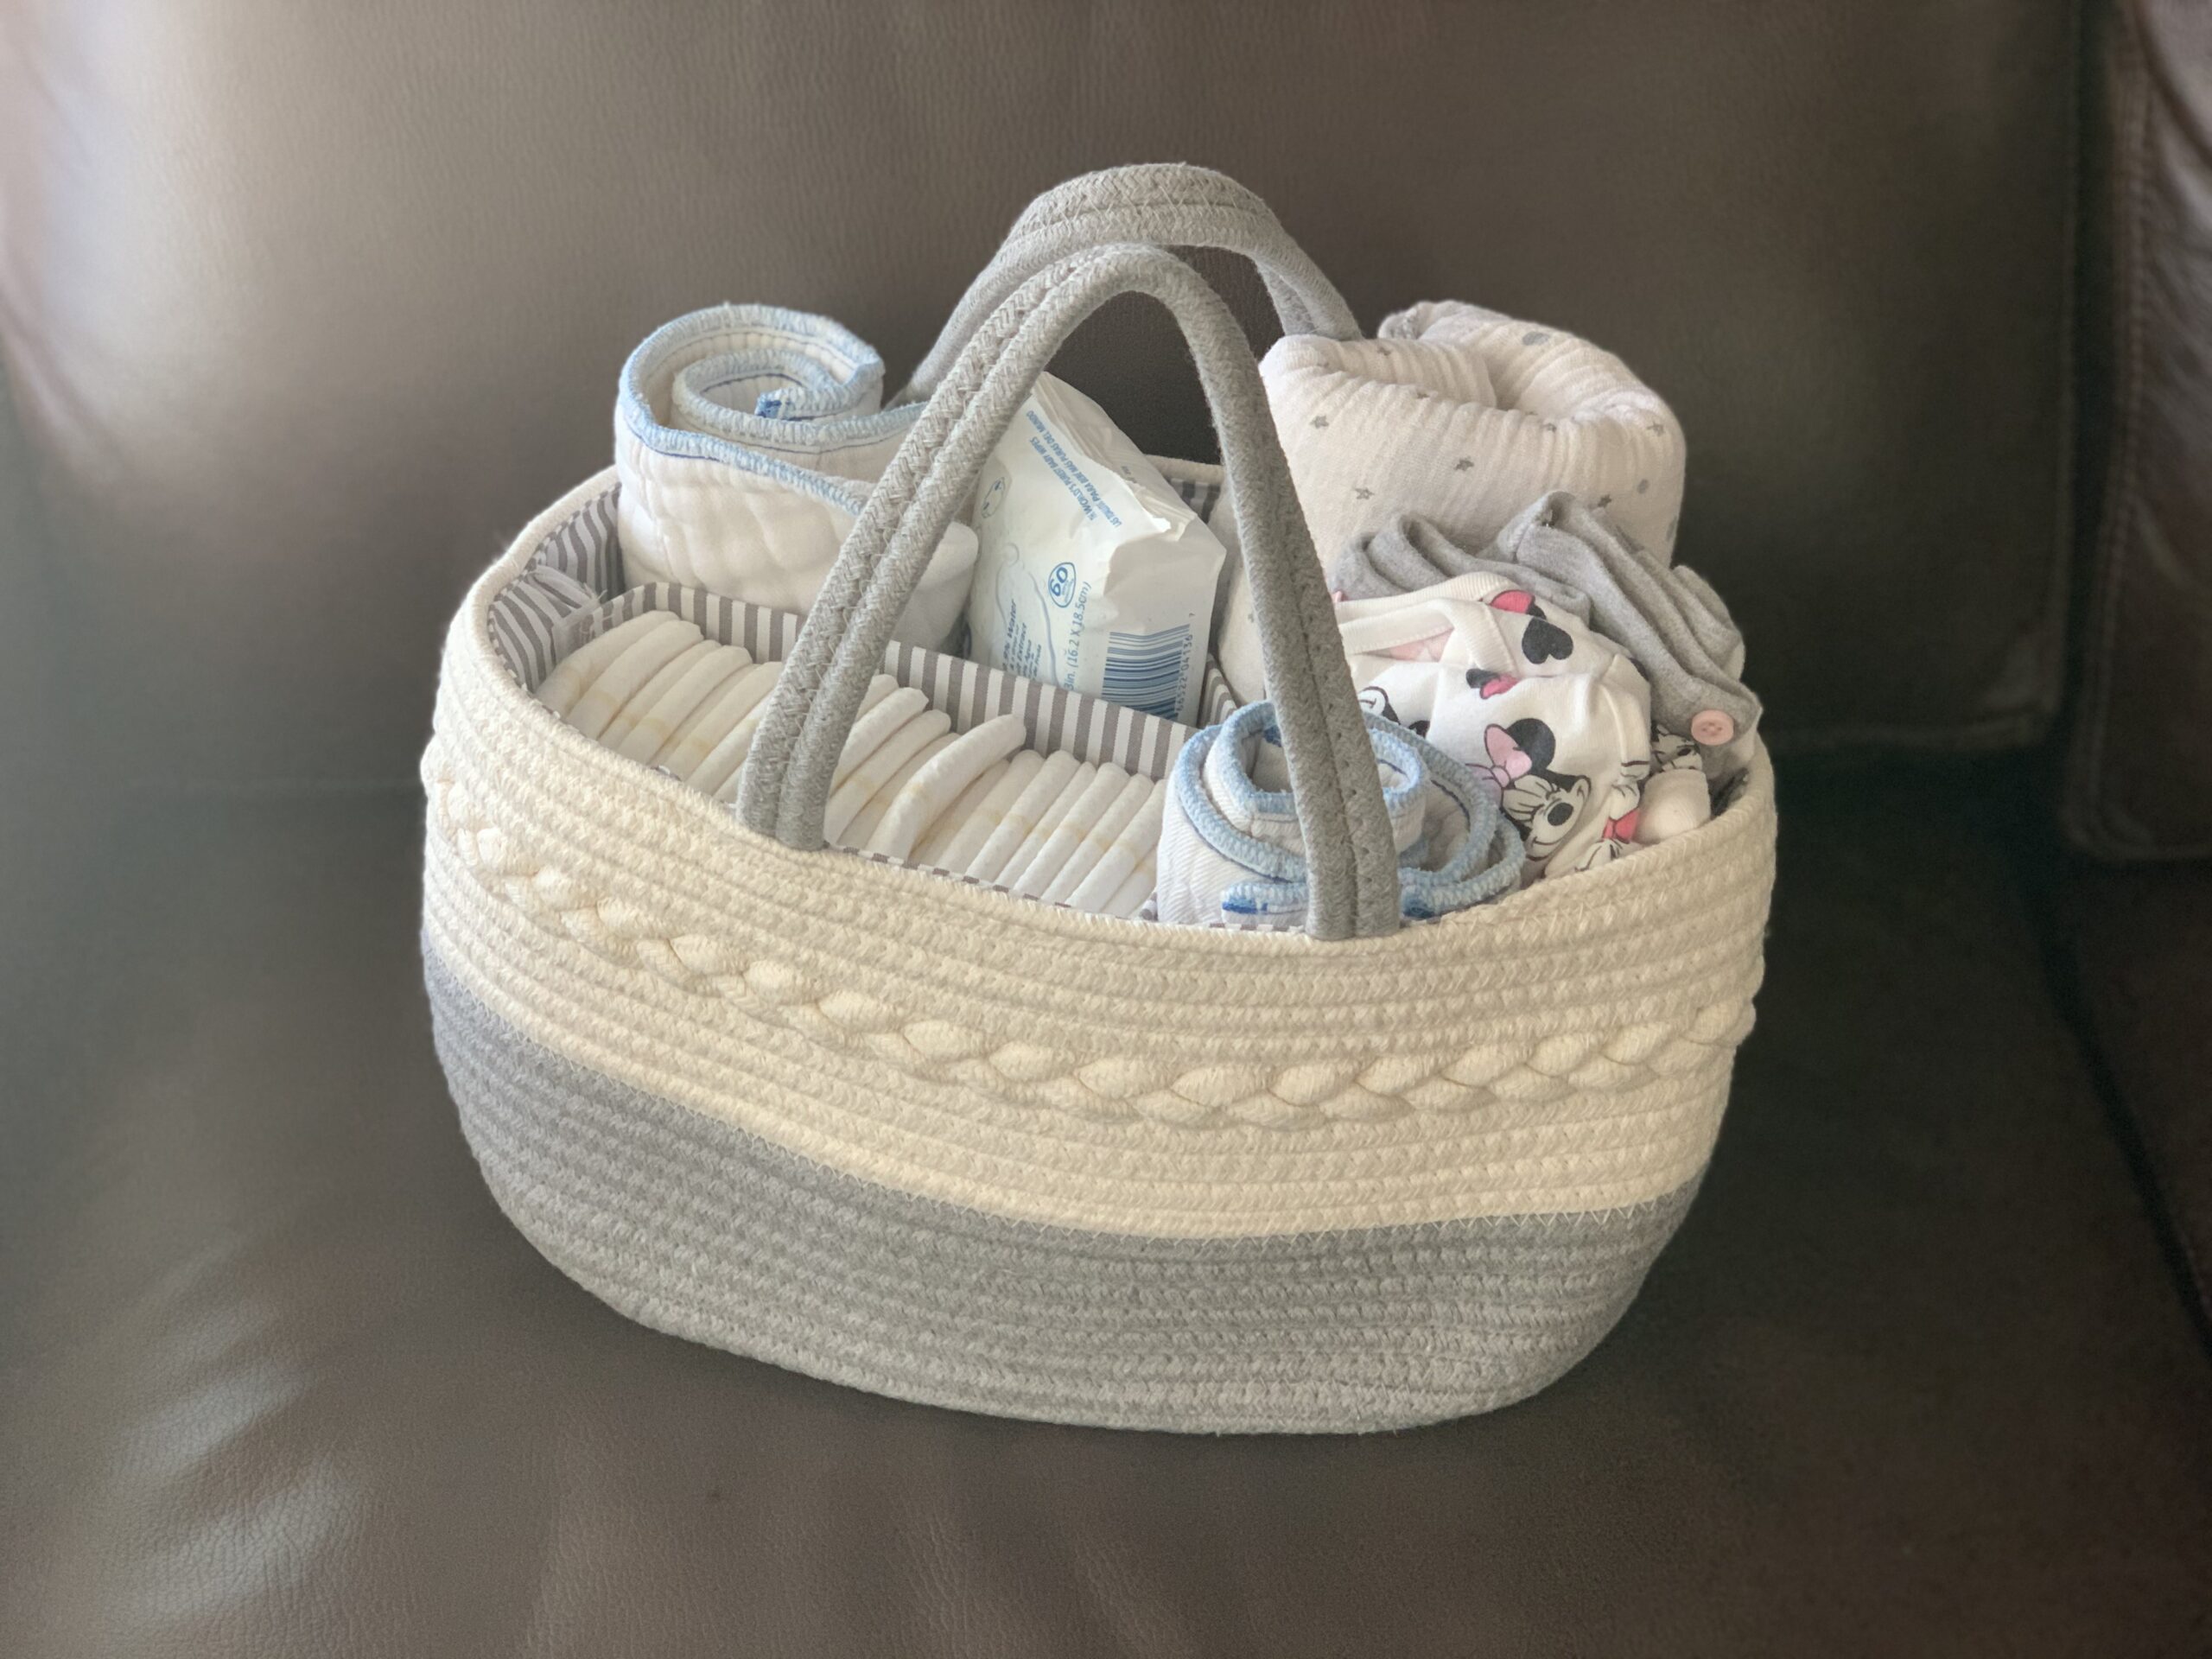 Basket filled with newborn essentials to keep in the living room to help minimize going up and down stairs